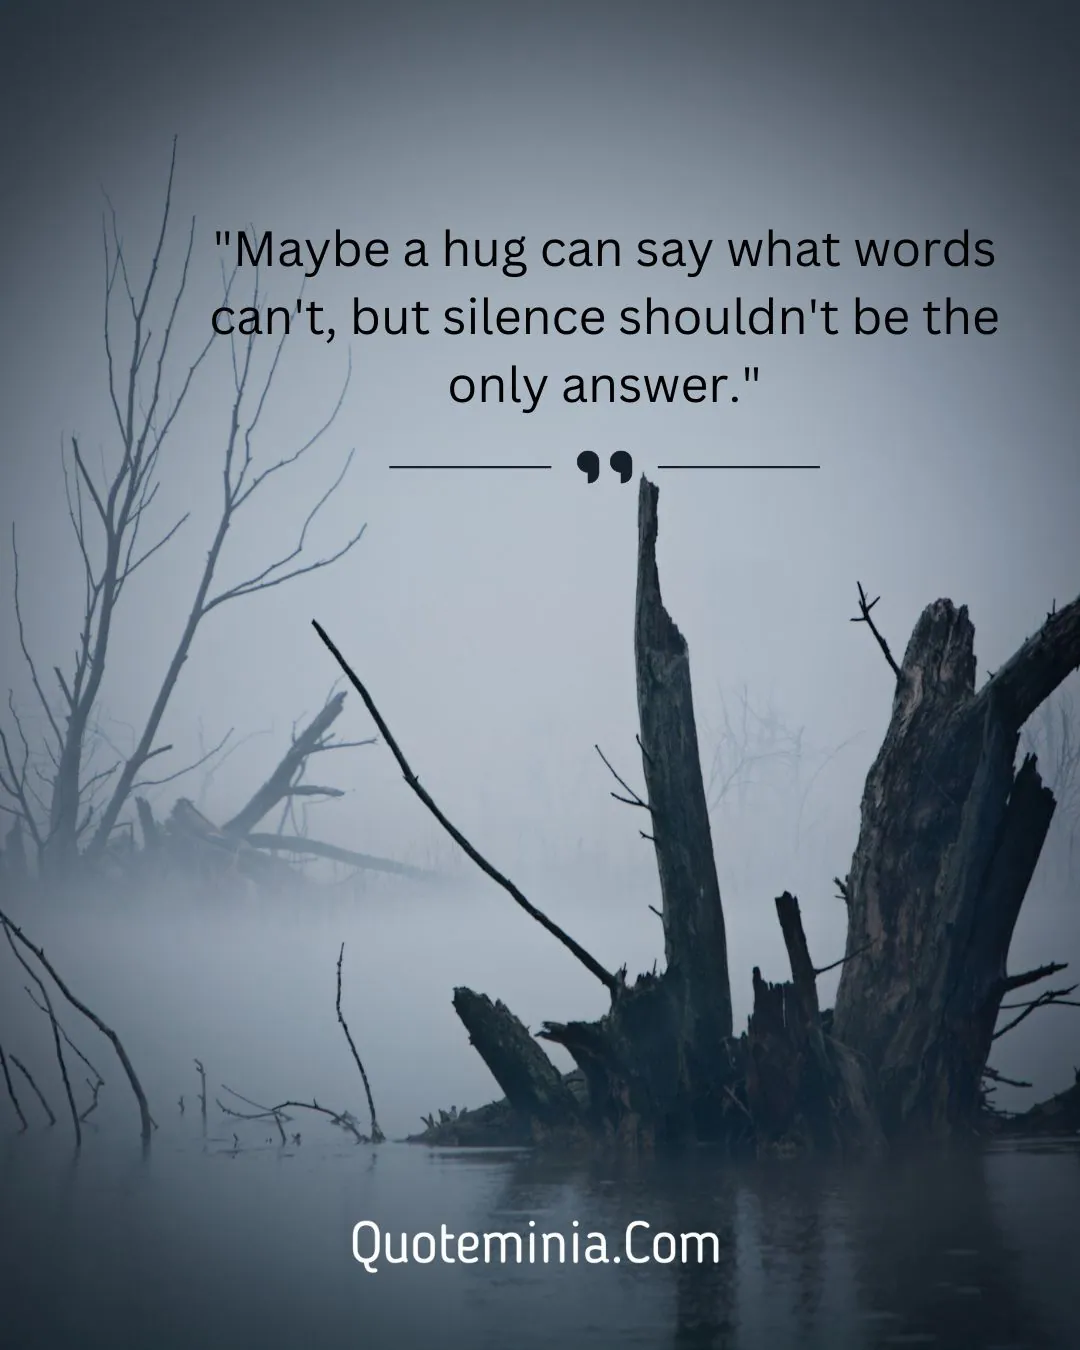 Hurt Silence Quotes Relationships Image 3